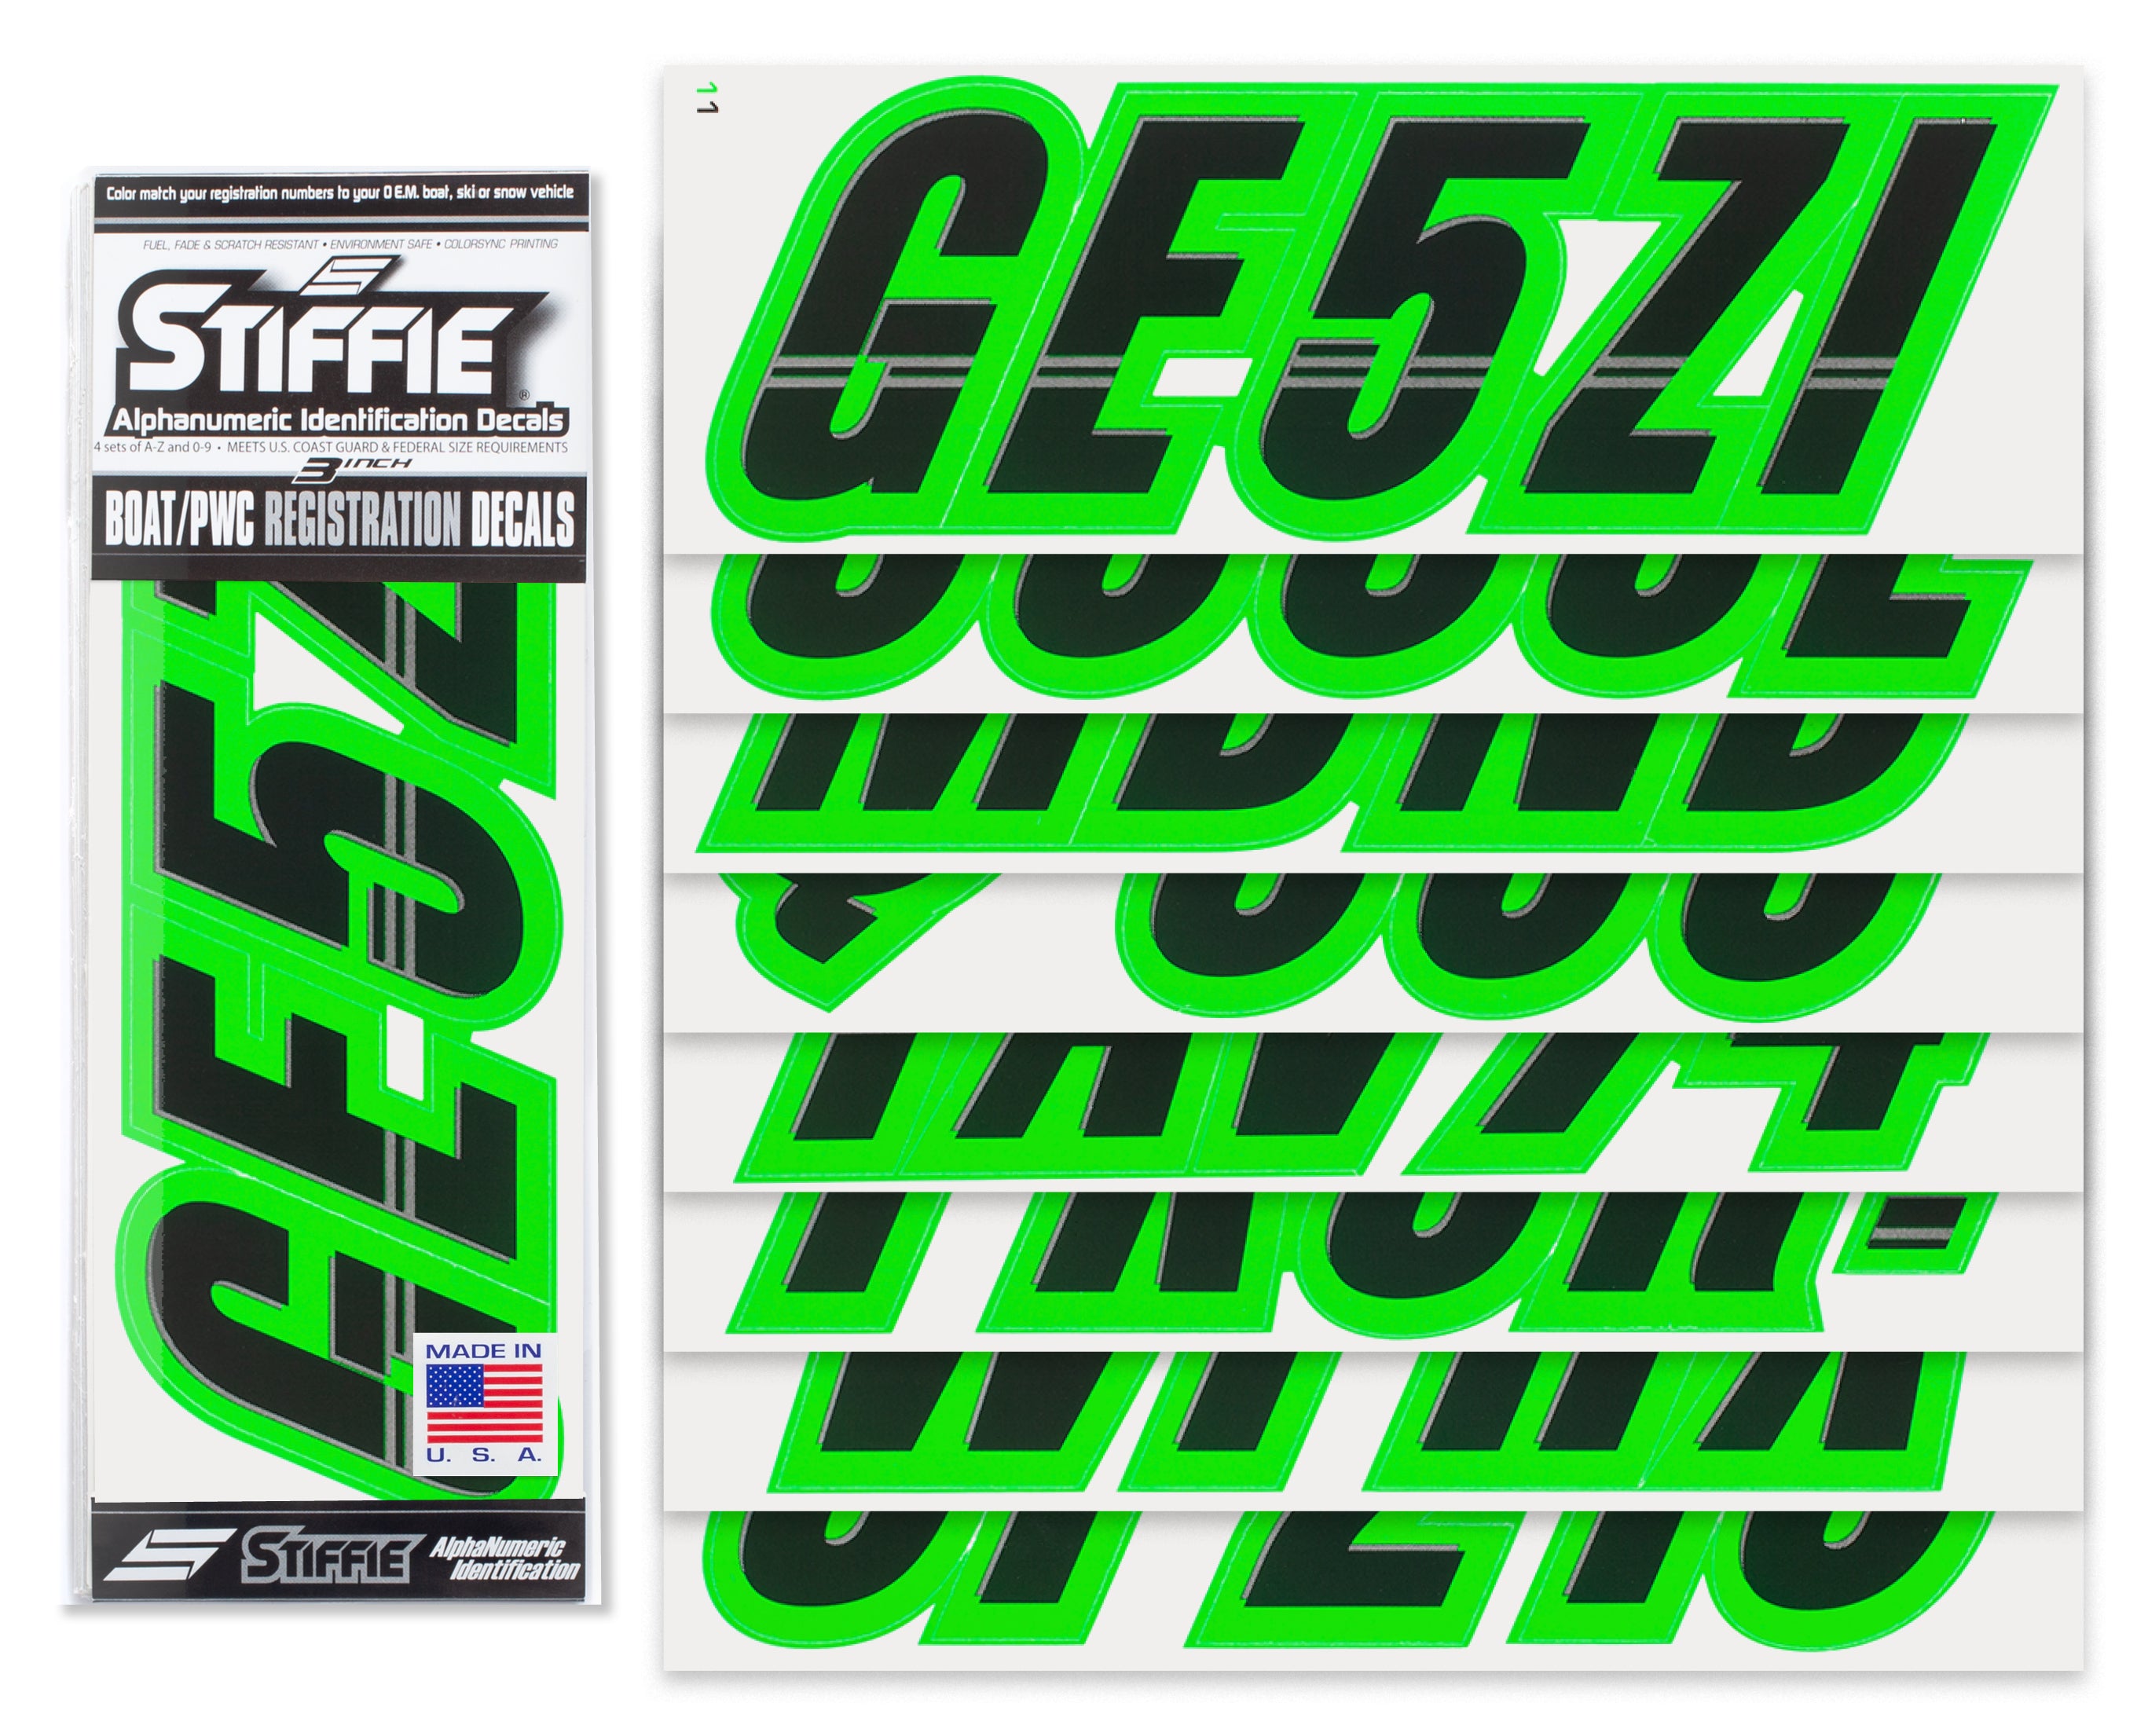 STIFFIE Techtron Black/Electric Green 3" Alpha-Numeric Registration Identification Numbers Stickers Decals for Boats & Personal Watercraft